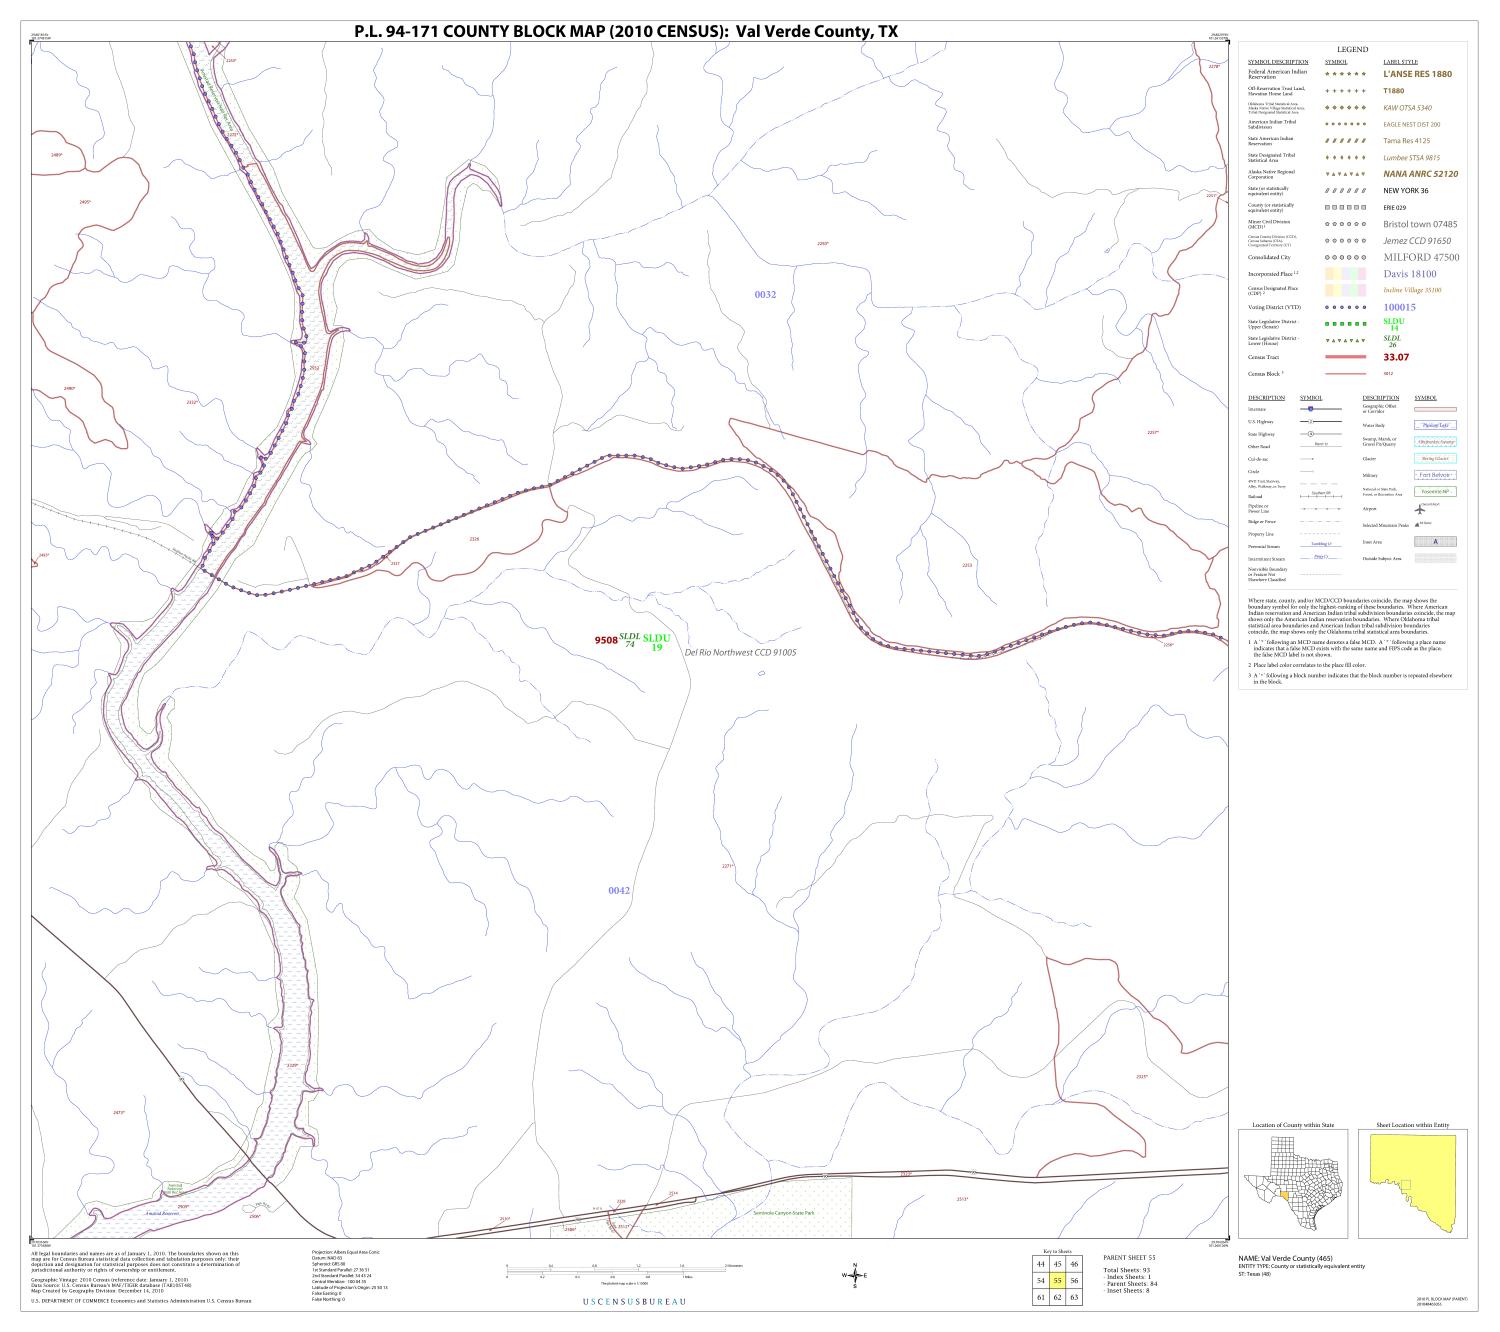 P.L. 94-171 County Block Map (2010 Census): Val Verde County, Block 55
                                                
                                                    [Sequence #]: 1 of 1
                                                